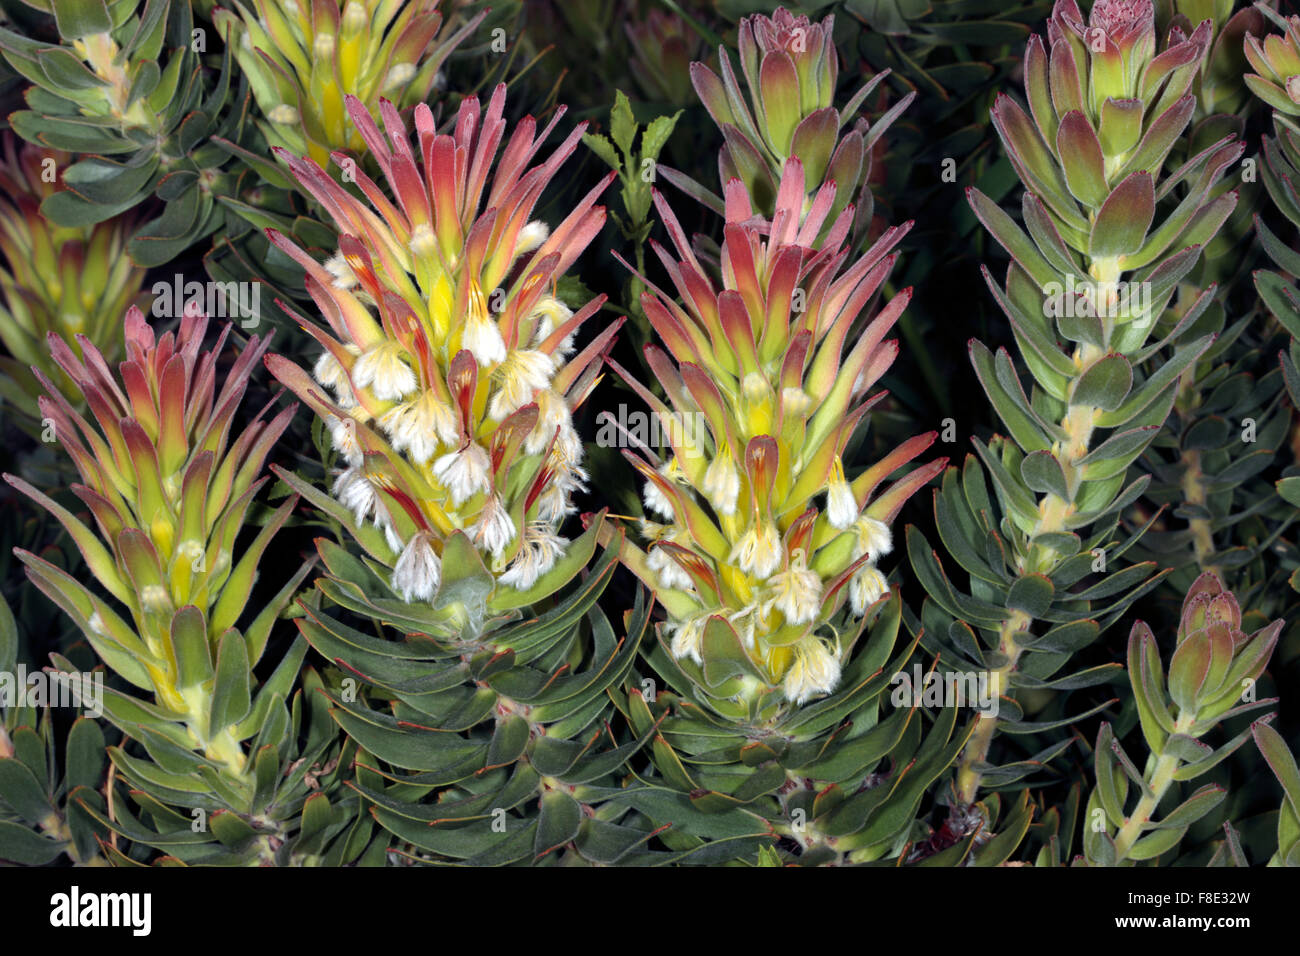 Red-crested/ Red/ Common Pagoda/ Rooistompe/ Stompie/ Common Mimetes/ Pagoda - Mimetes cucullatus - Family Proteaceae Stock Photo